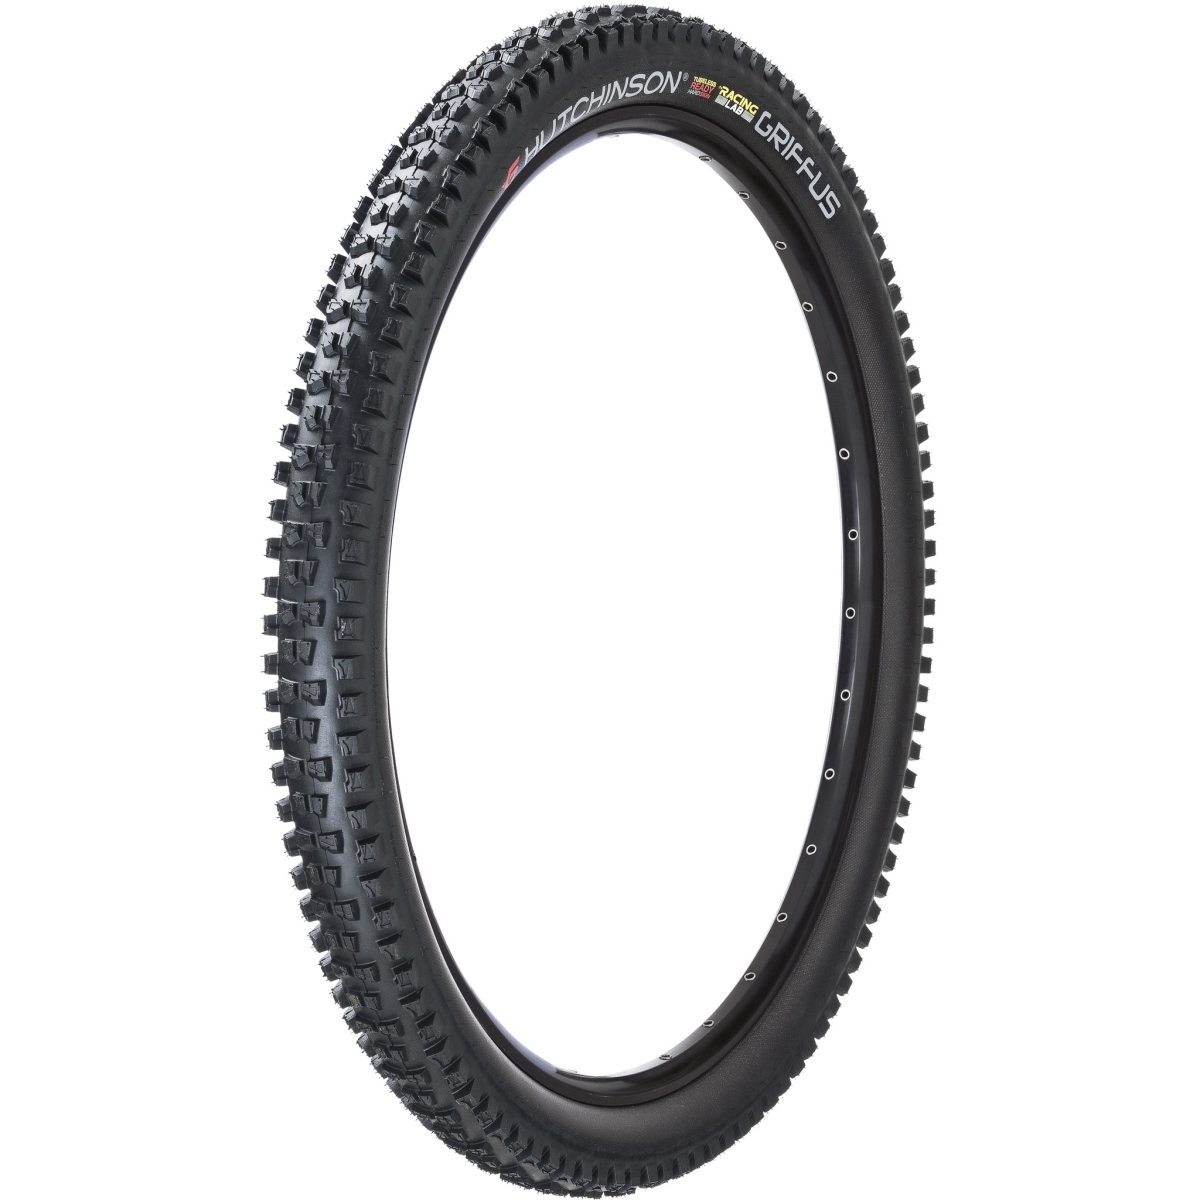 Hutchinson 329193 27.5 x 2.4 in. Griffus Racing Lab Tubeless Tire